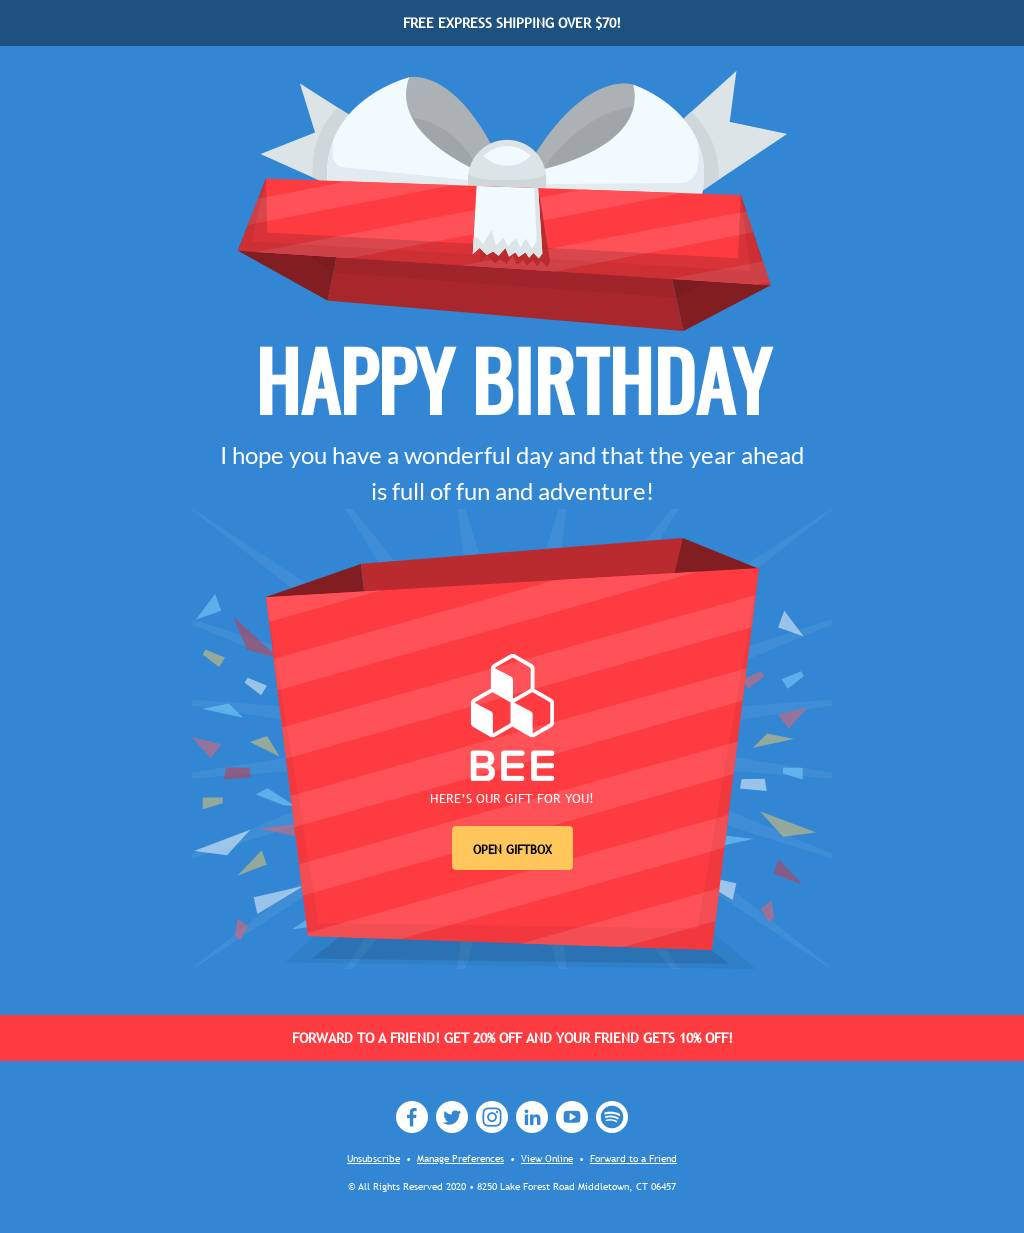 Template Bee Free Email Template Design Birthday Email Happy Birthday Email